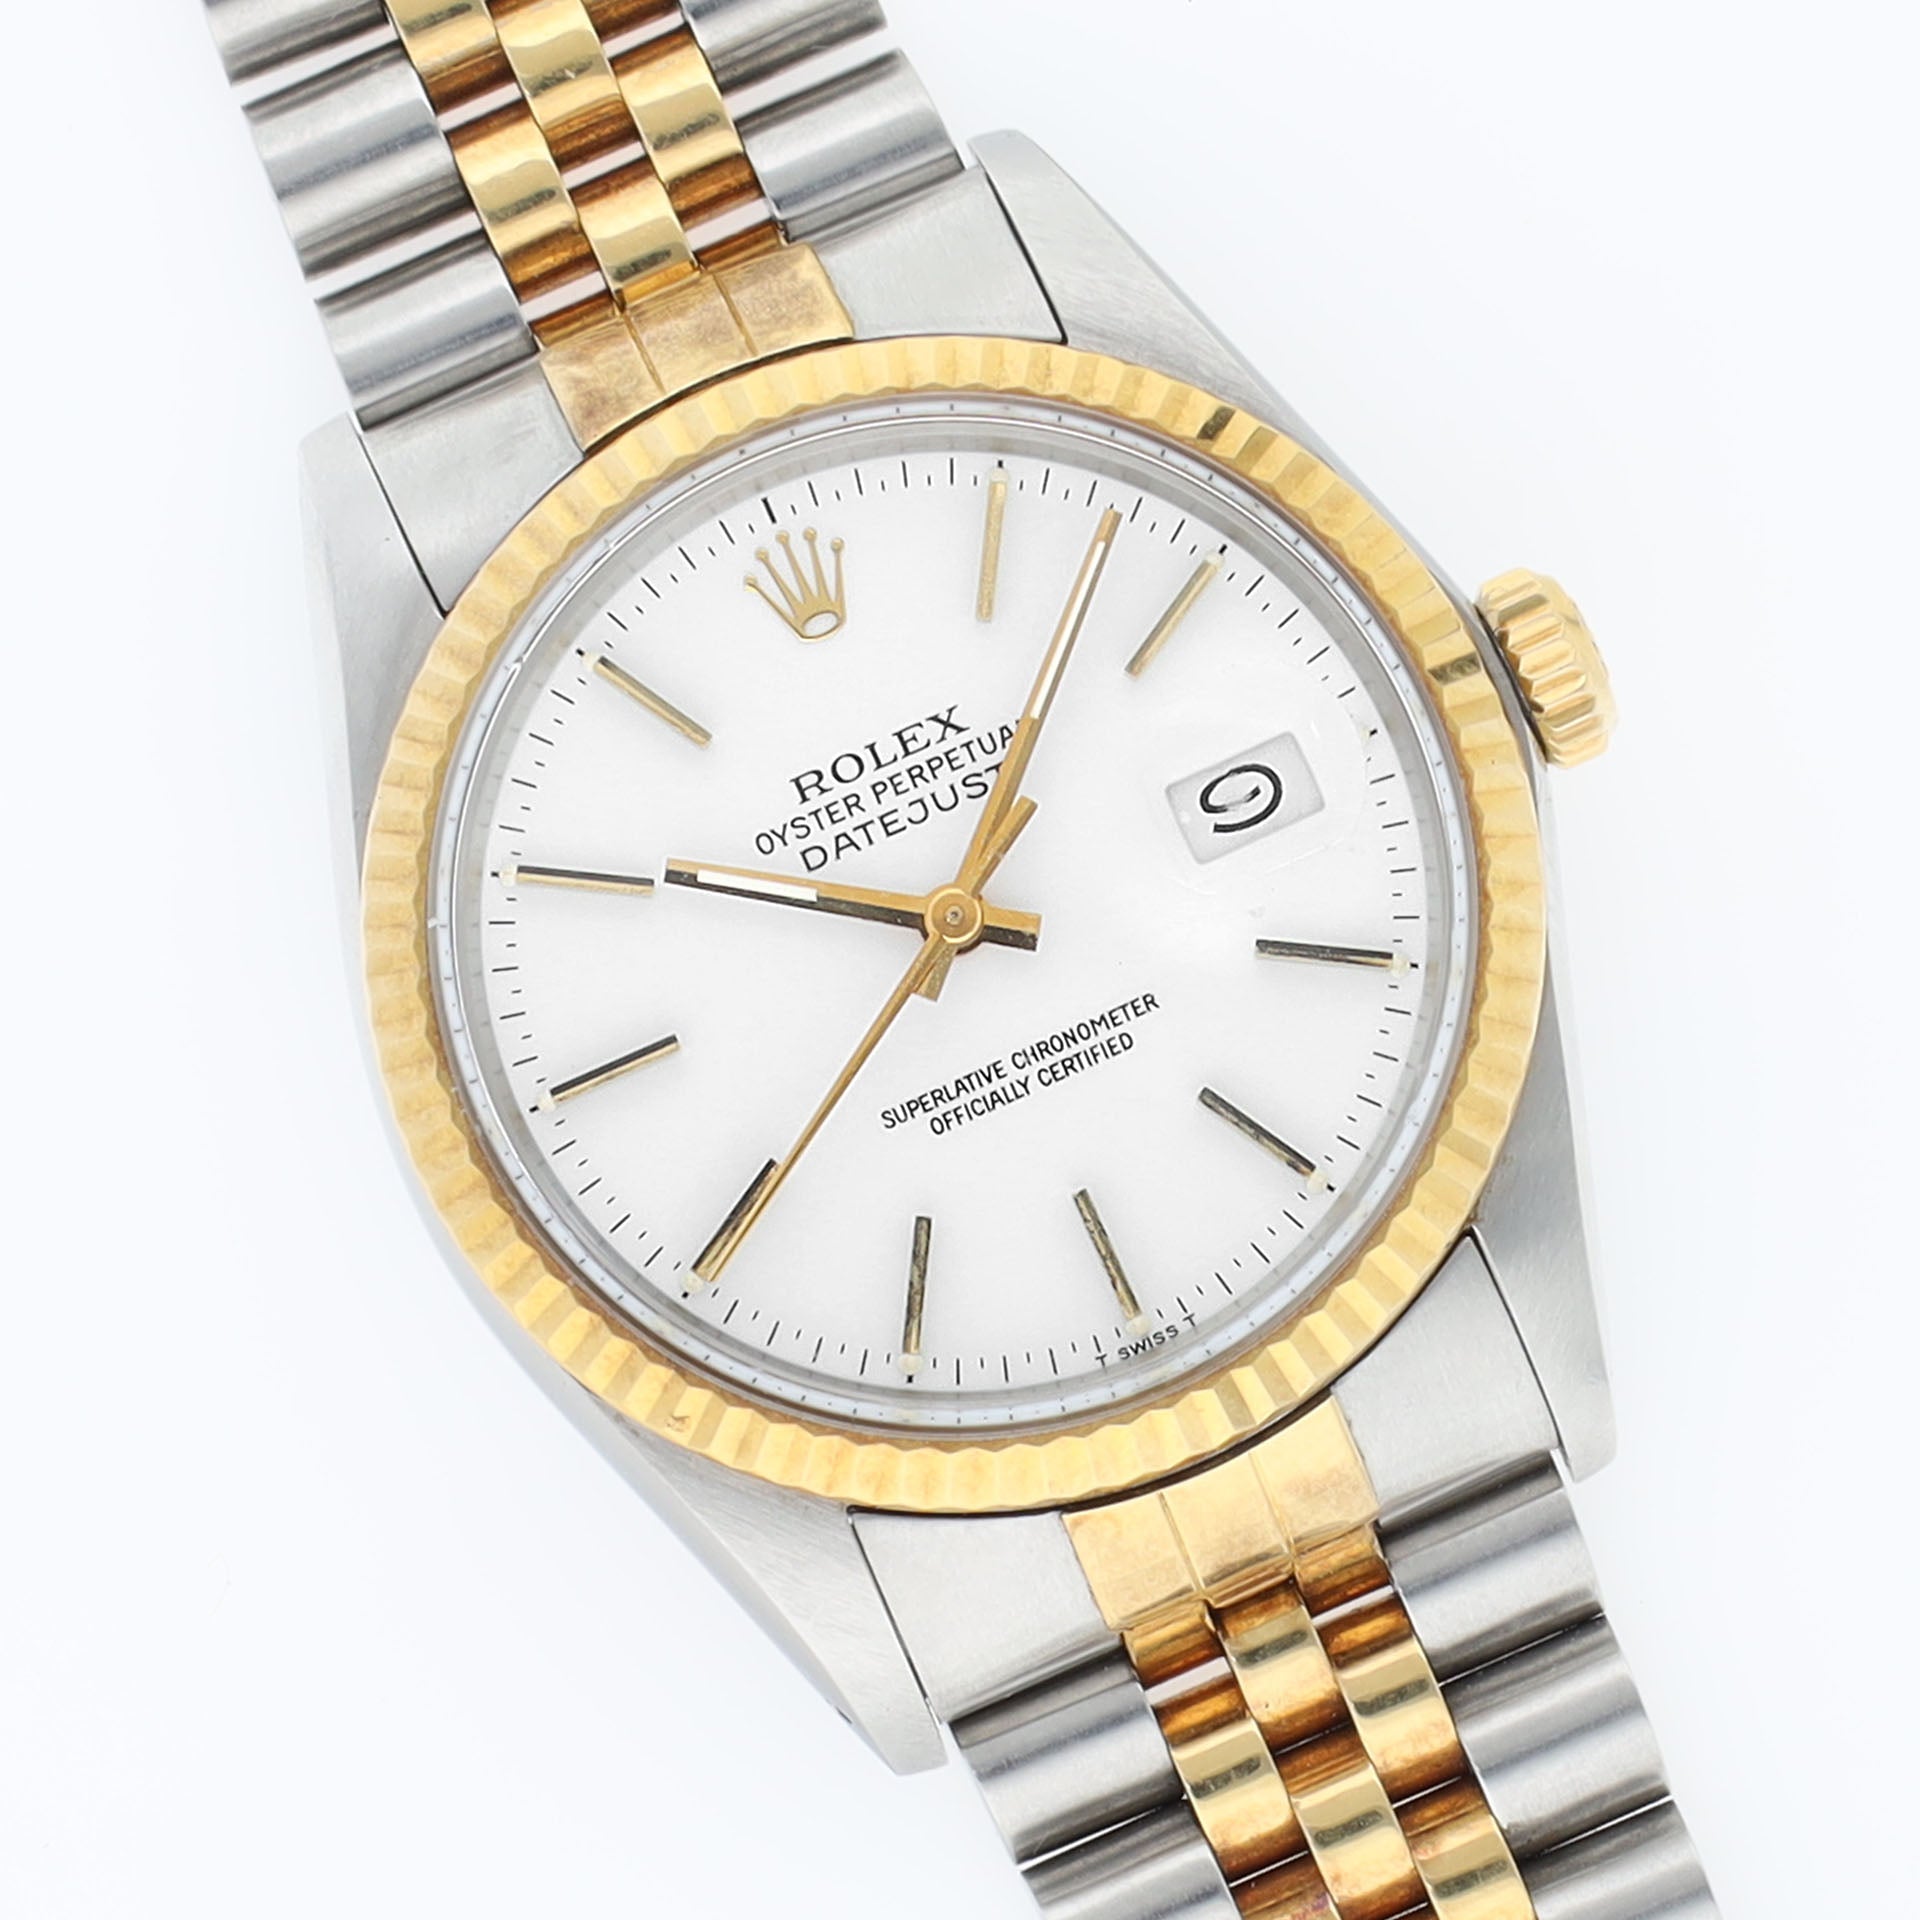 Rolex Datejust 16013 Steel and Gold with Porcelain Dial